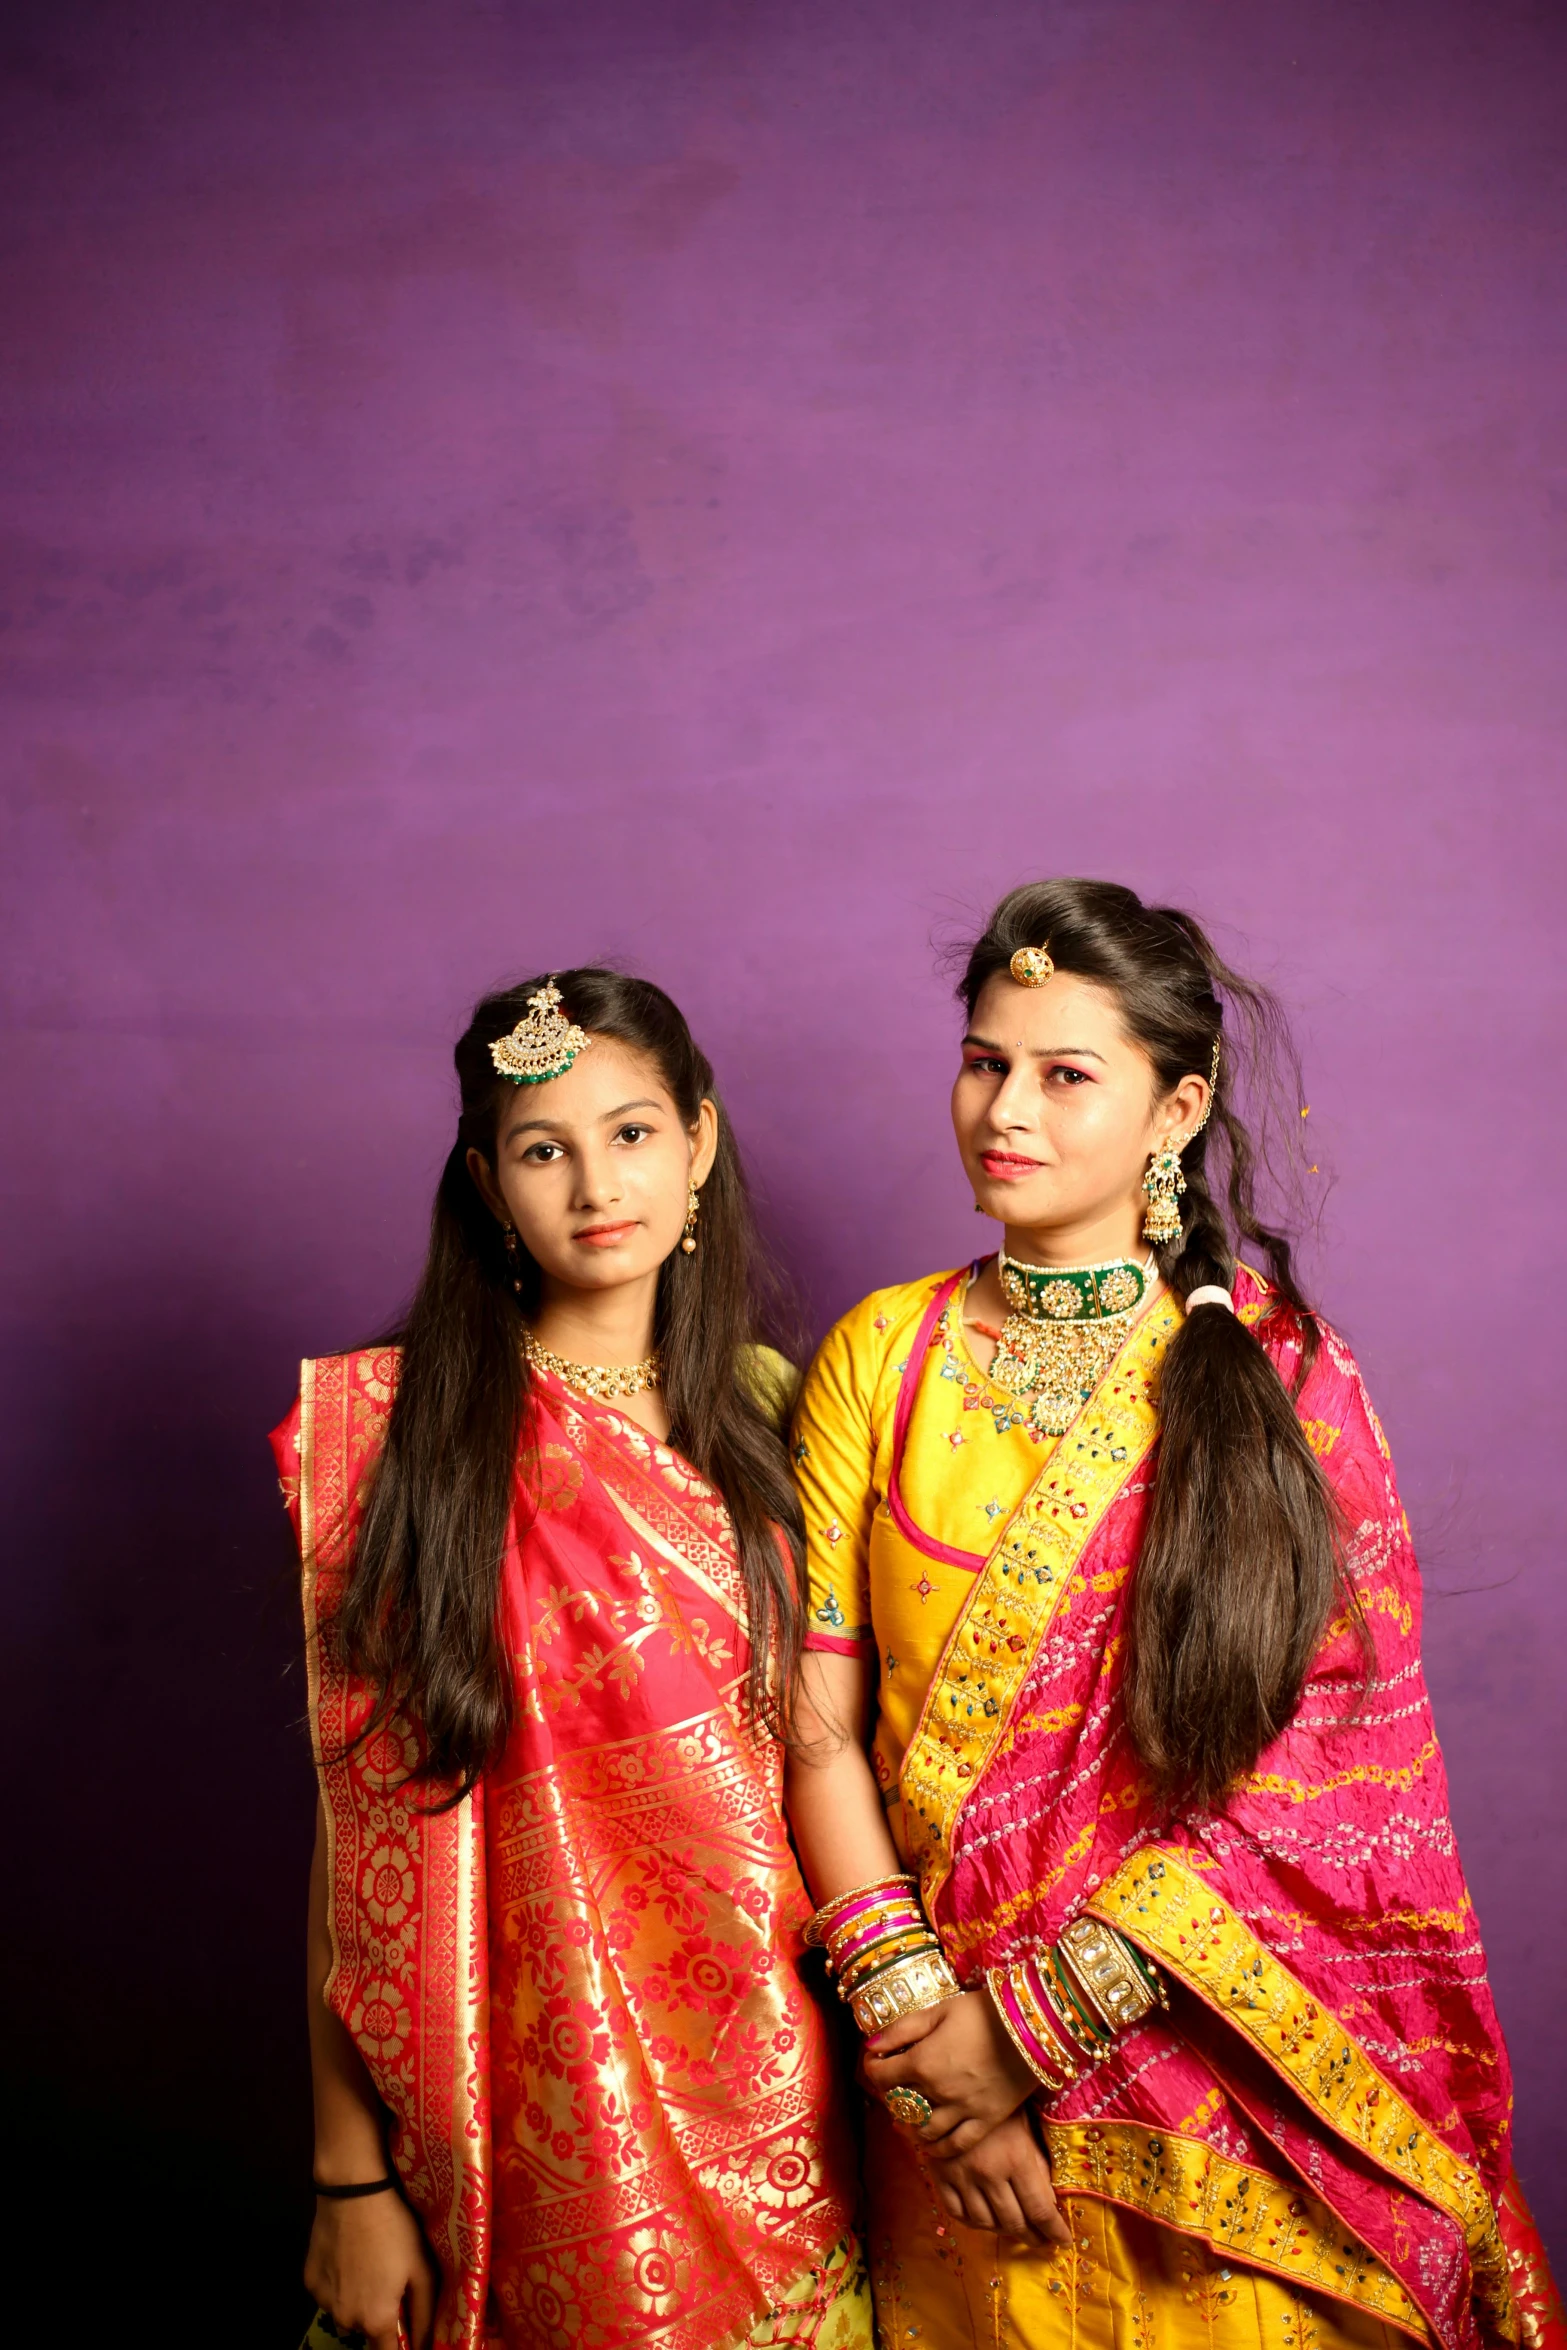 two girls dressed in different colors are posing together